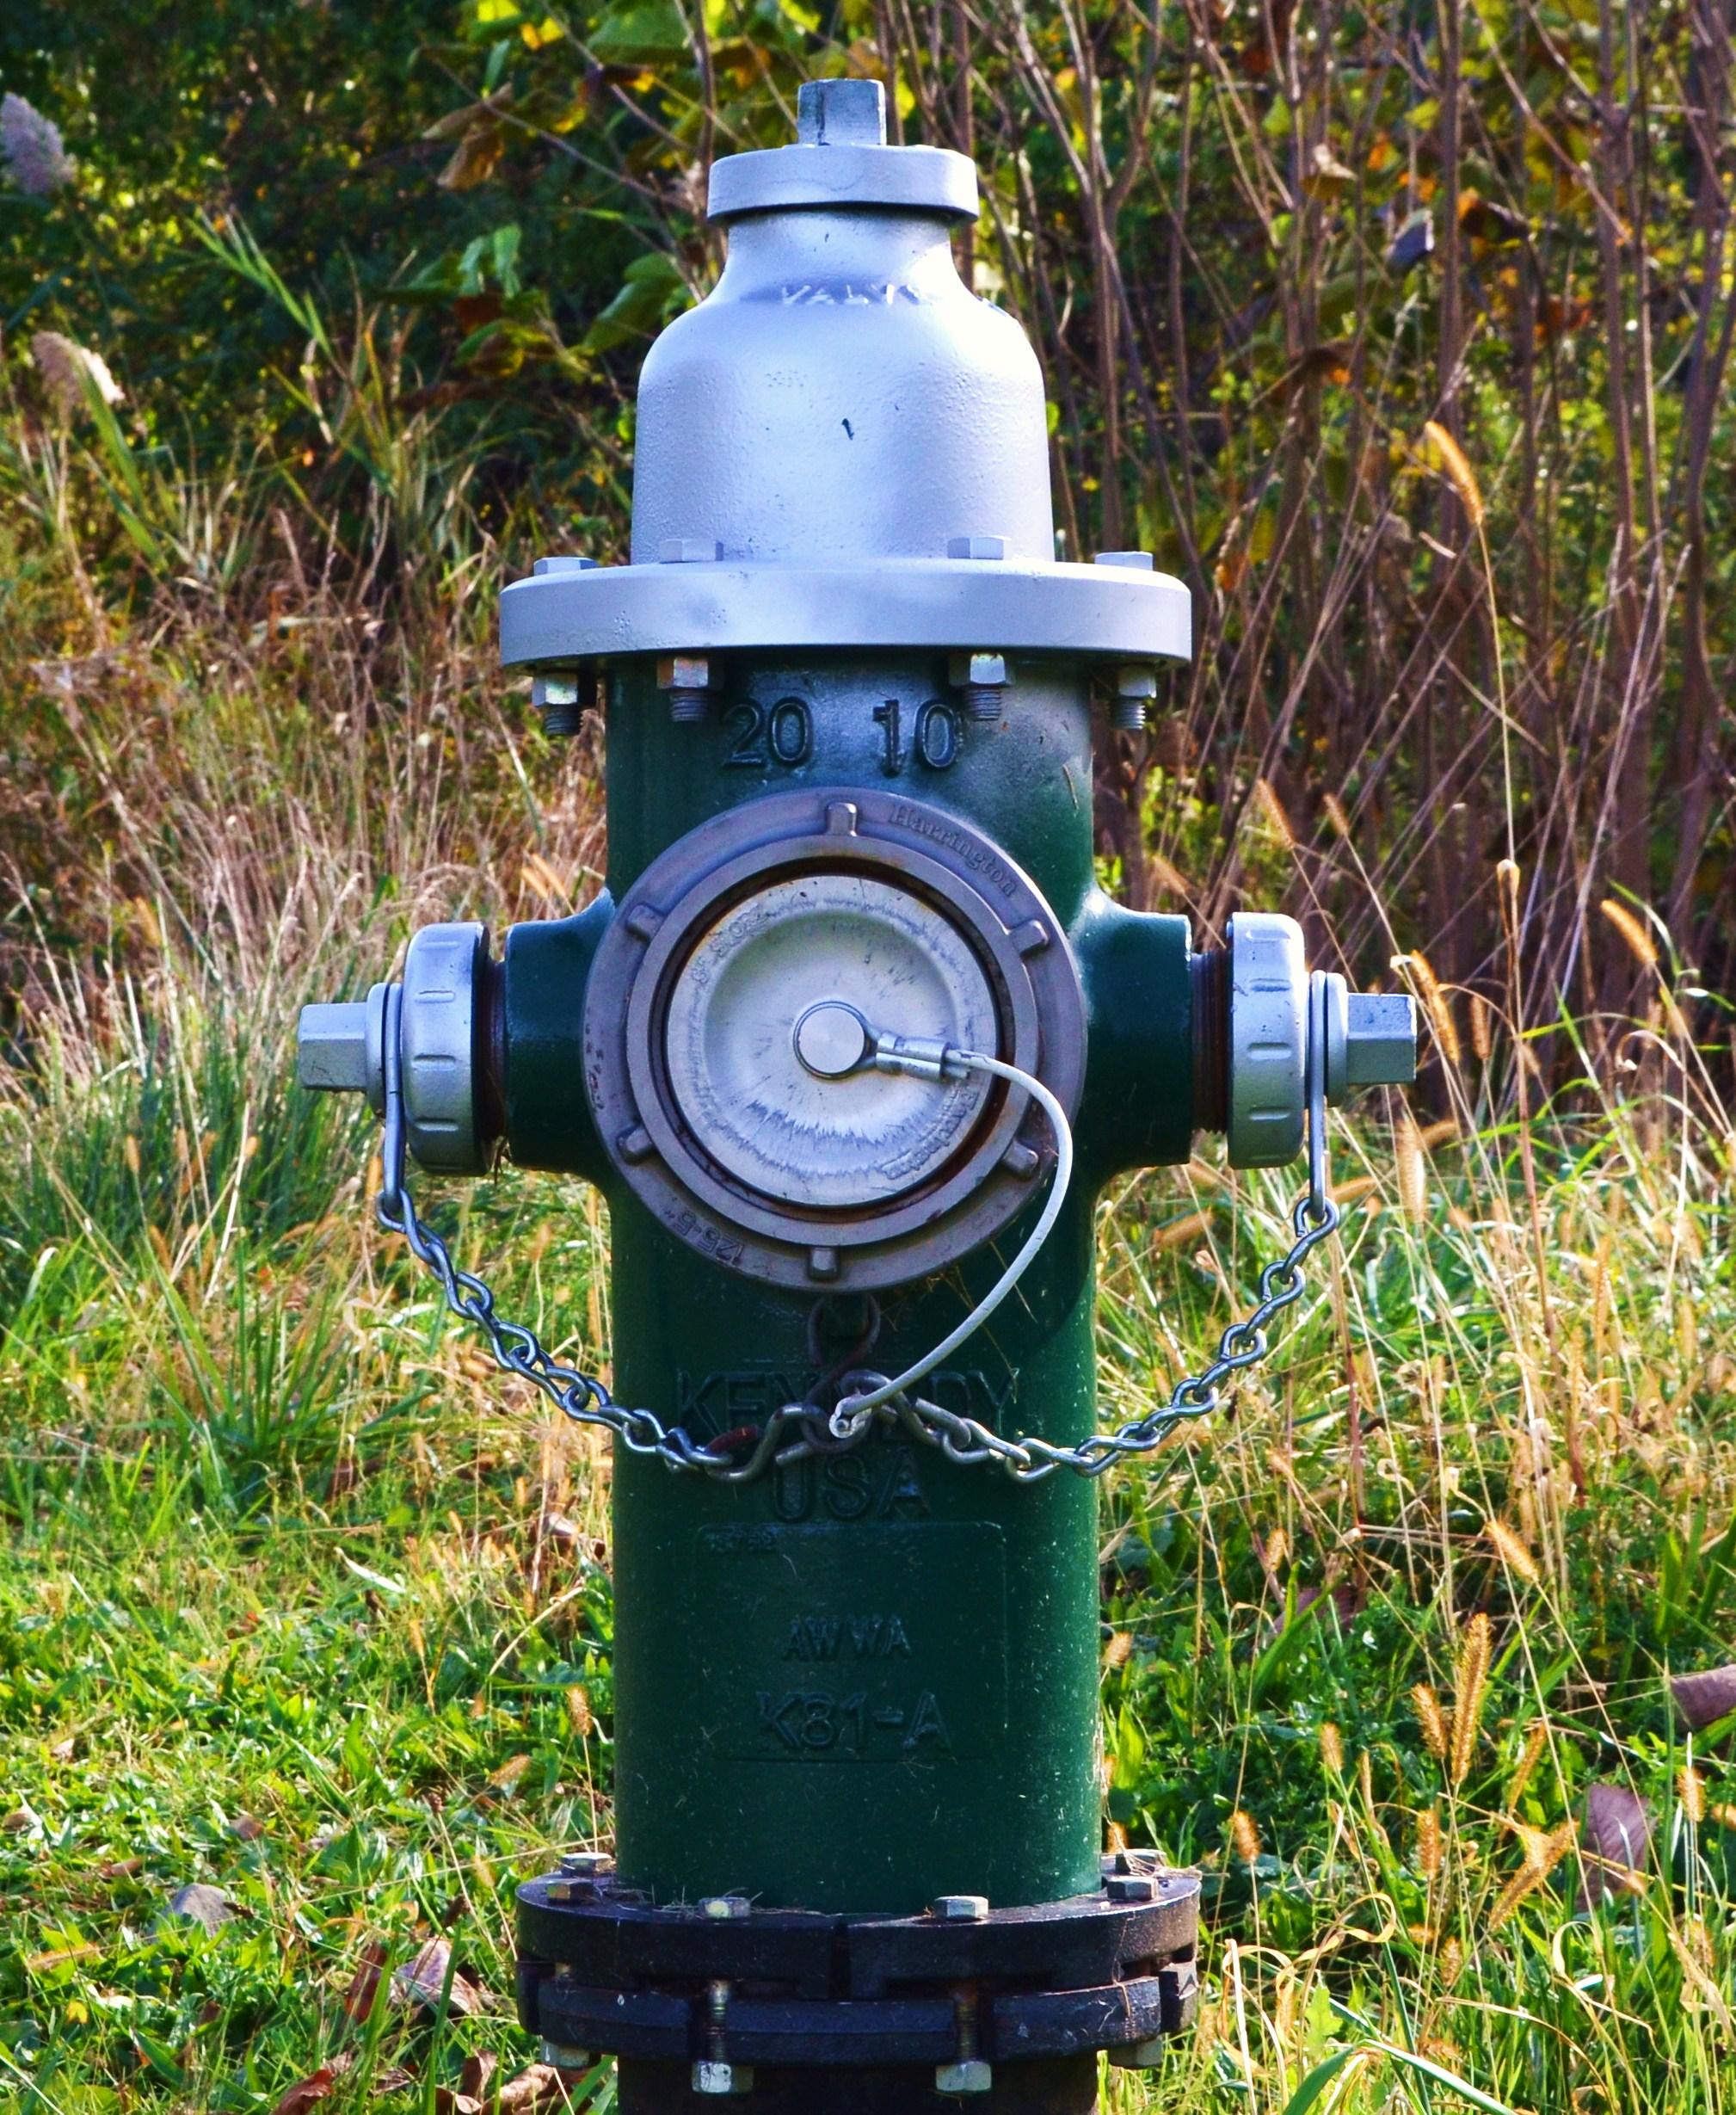 Hydrant Flushing to Begin in All Three Villages | Warwick Valley ...